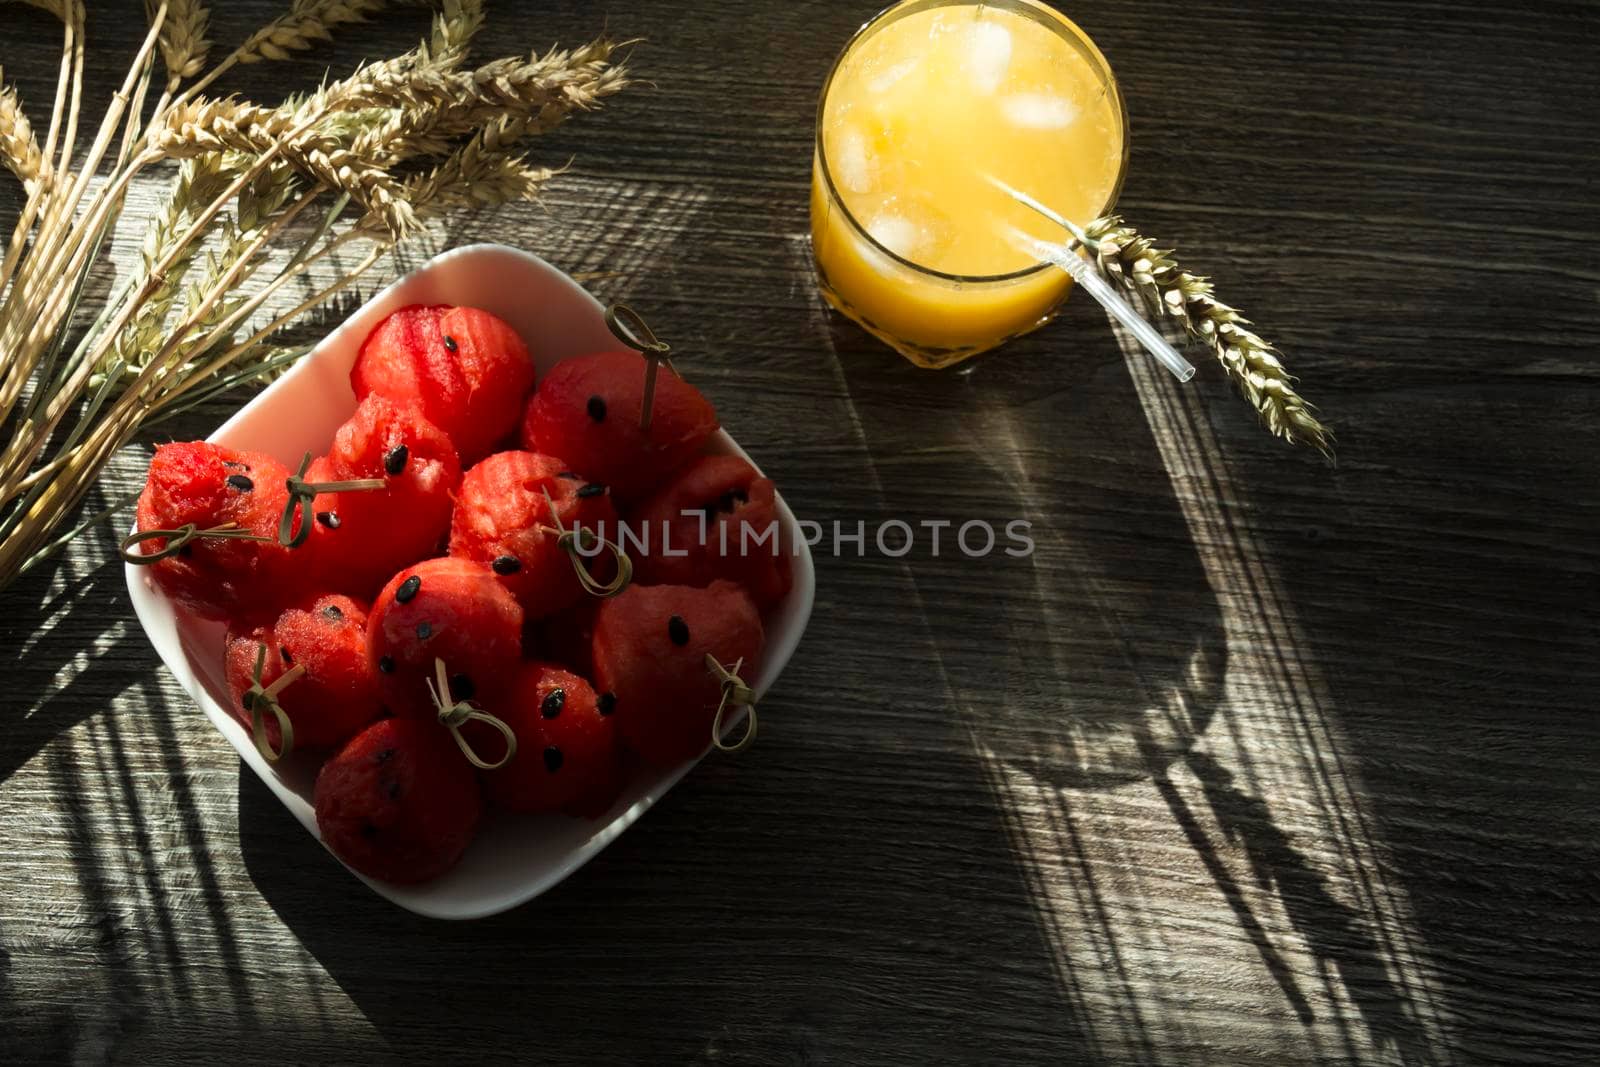 Freshly squeezed orange juice, sweet watermelon dessert and spikelets of ripe wheat on a wooden table in the sunlight...